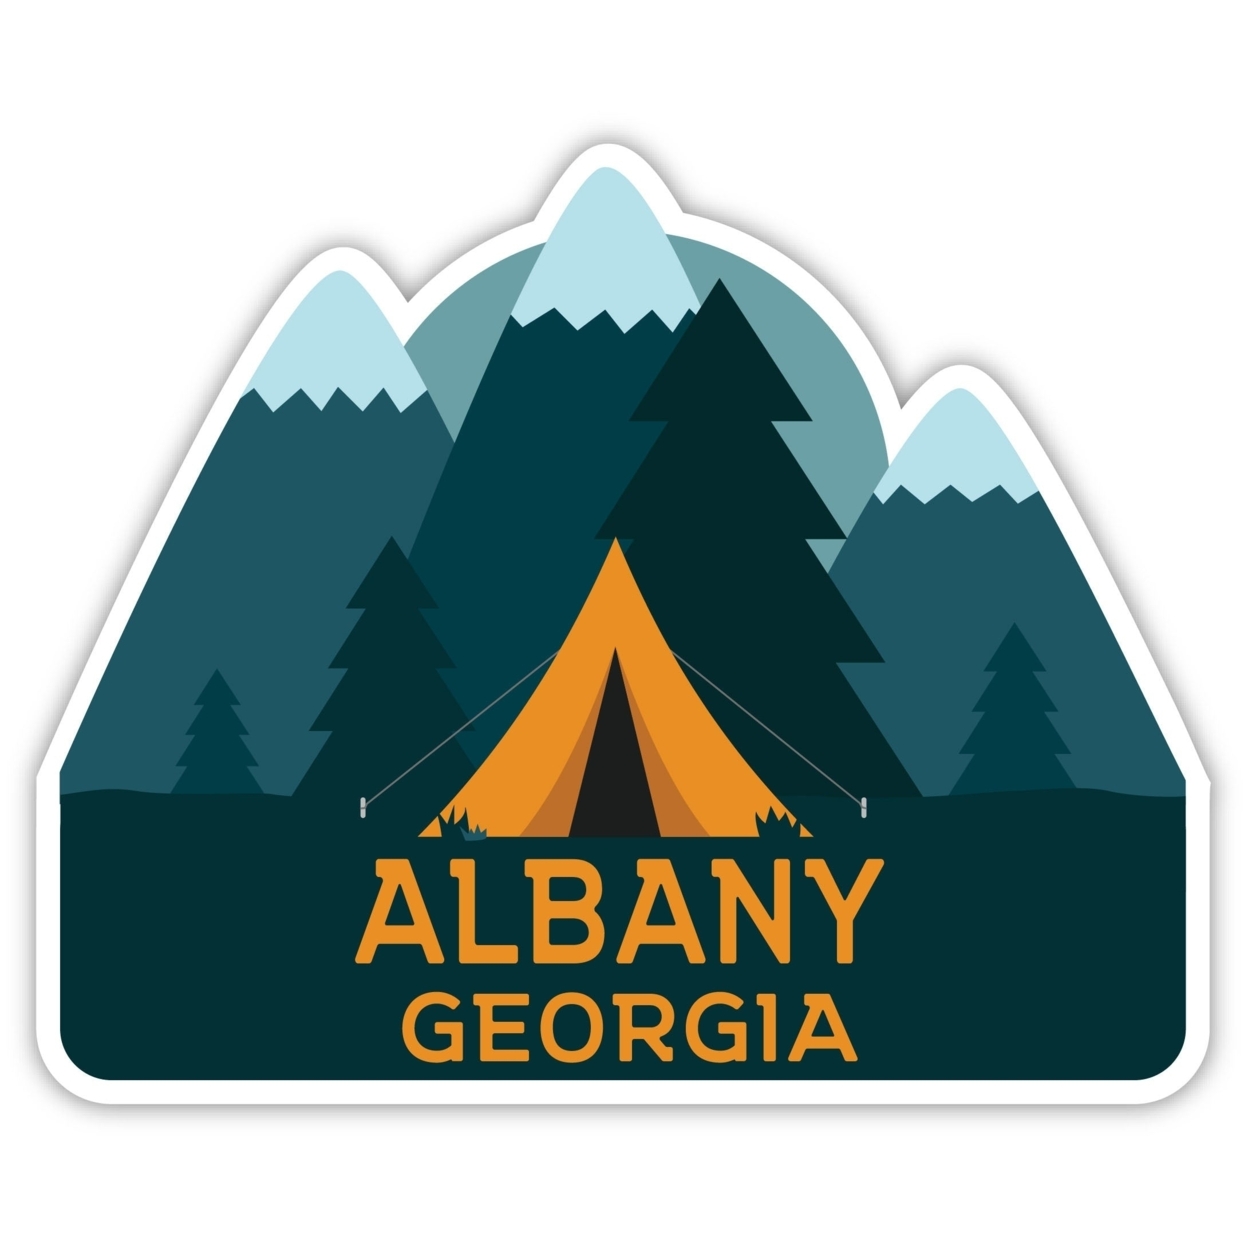 Albany Georgia Souvenir Decorative Stickers (Choose Theme And Size) - 4-Pack, 2-Inch, Tent